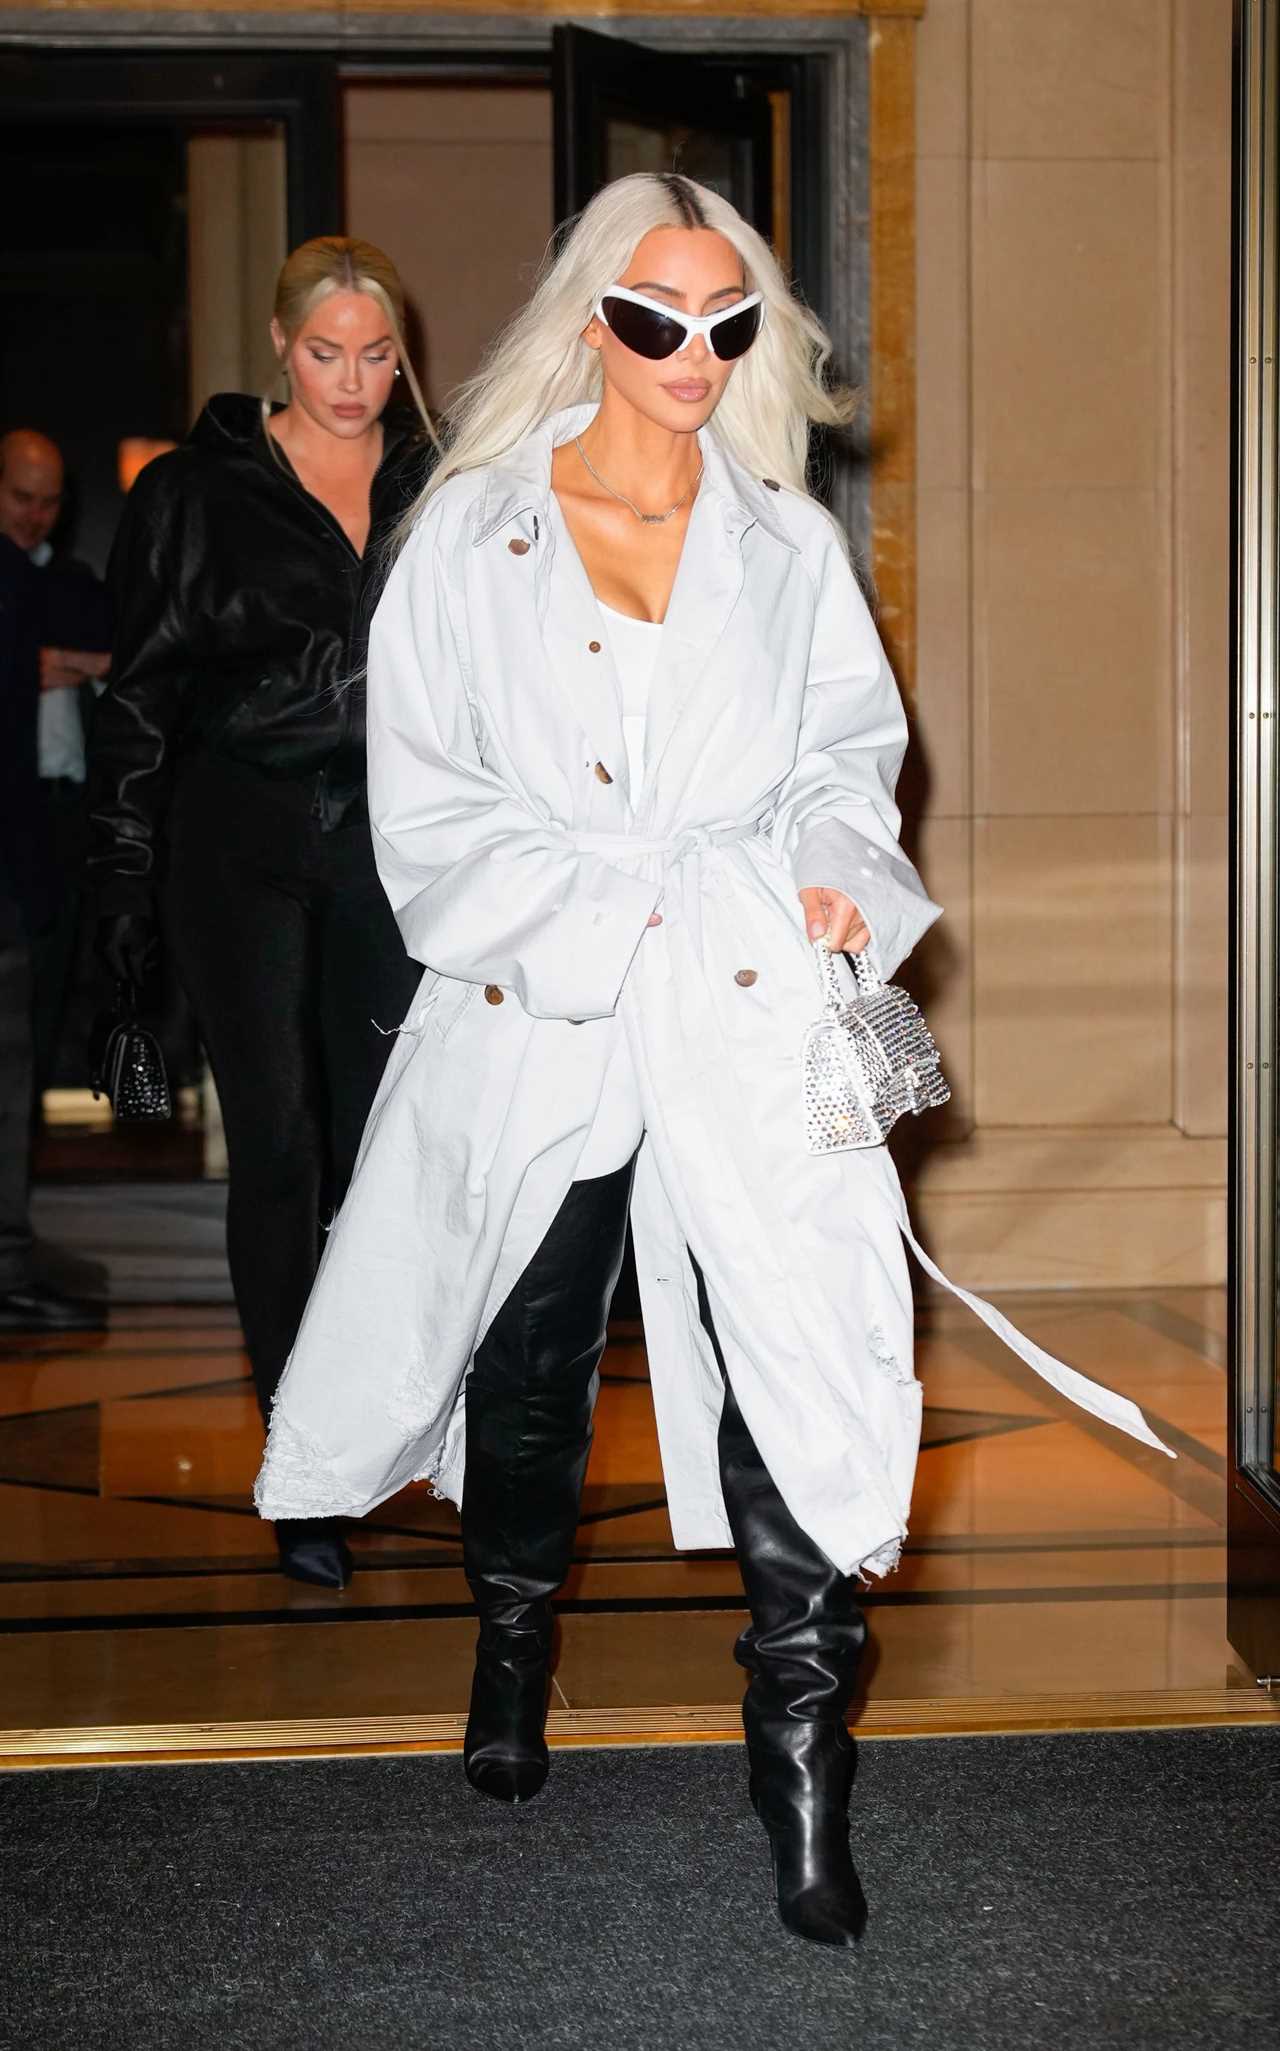 Kim Kardashian’s frail frame drowns in baggy trench coat in new photos after fans fear star took weight loss ‘too far